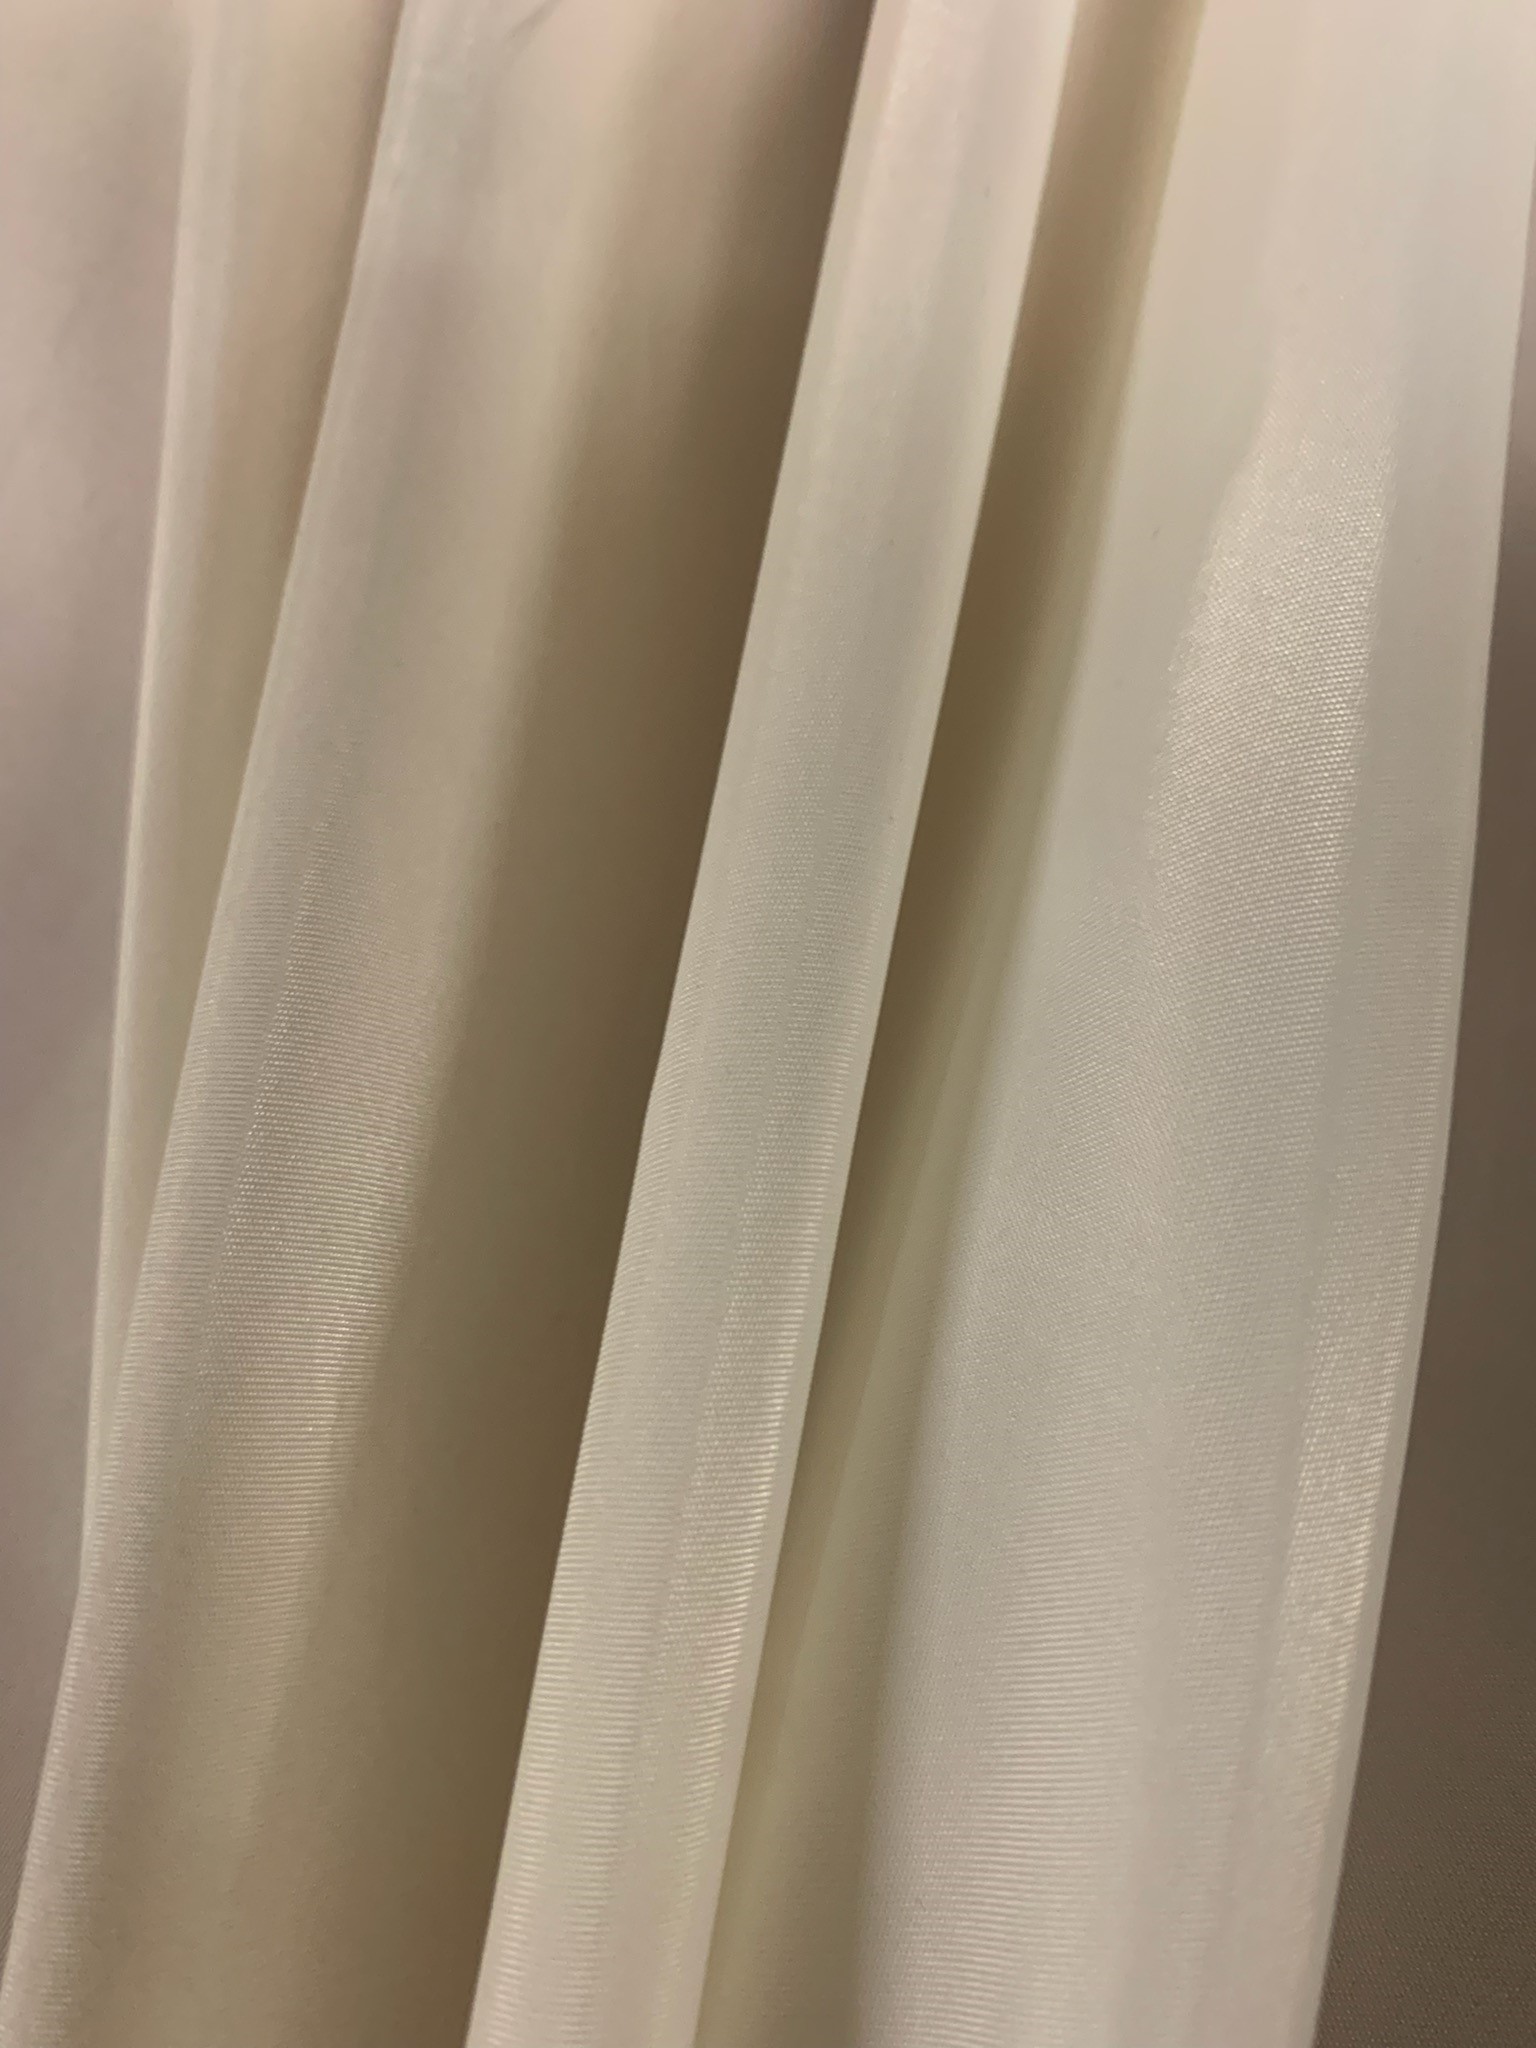 Ivory Lining Fabric 60" By The Yard - 100% Polyester - Click Image to Close